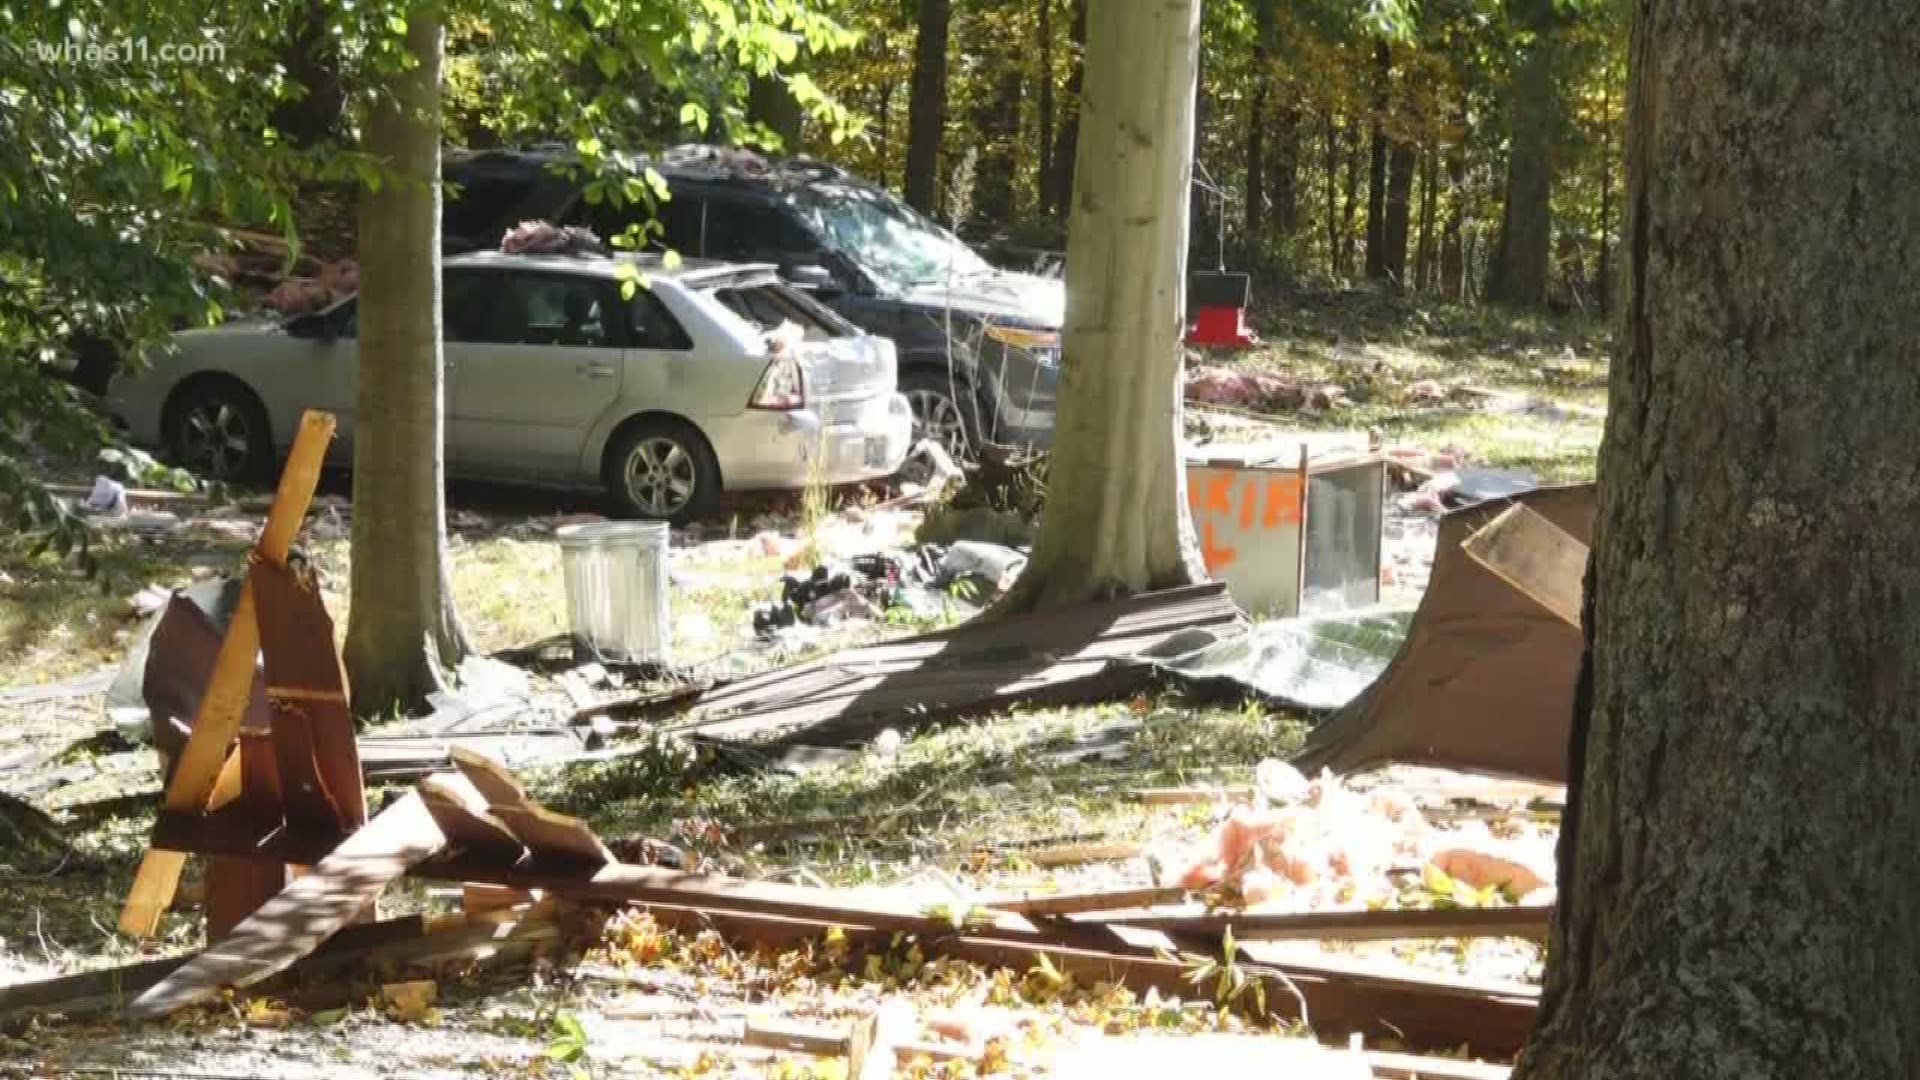 A mother remains at her son's bedside tonight at UofL Hospital...after a home explosion severely burned him and his cousin in Breckinridge County Saturday morning.